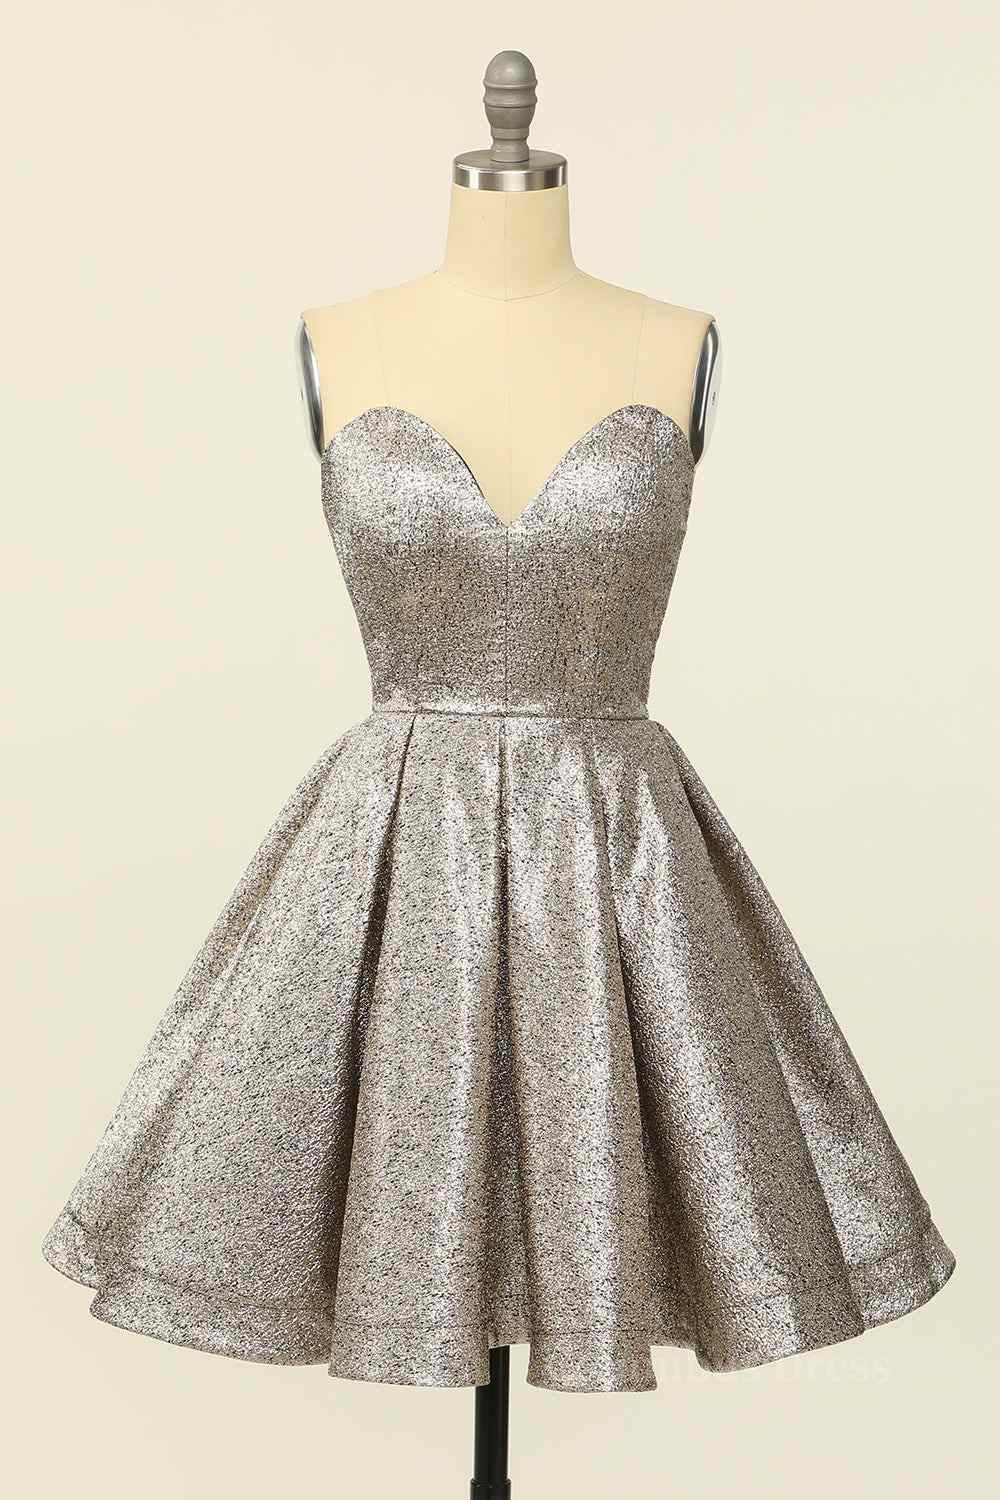 Silver A-line Strapless Sweetheart Lace-Up Back Mini Corset Homecoming Dress outfit, Party Dress Boots